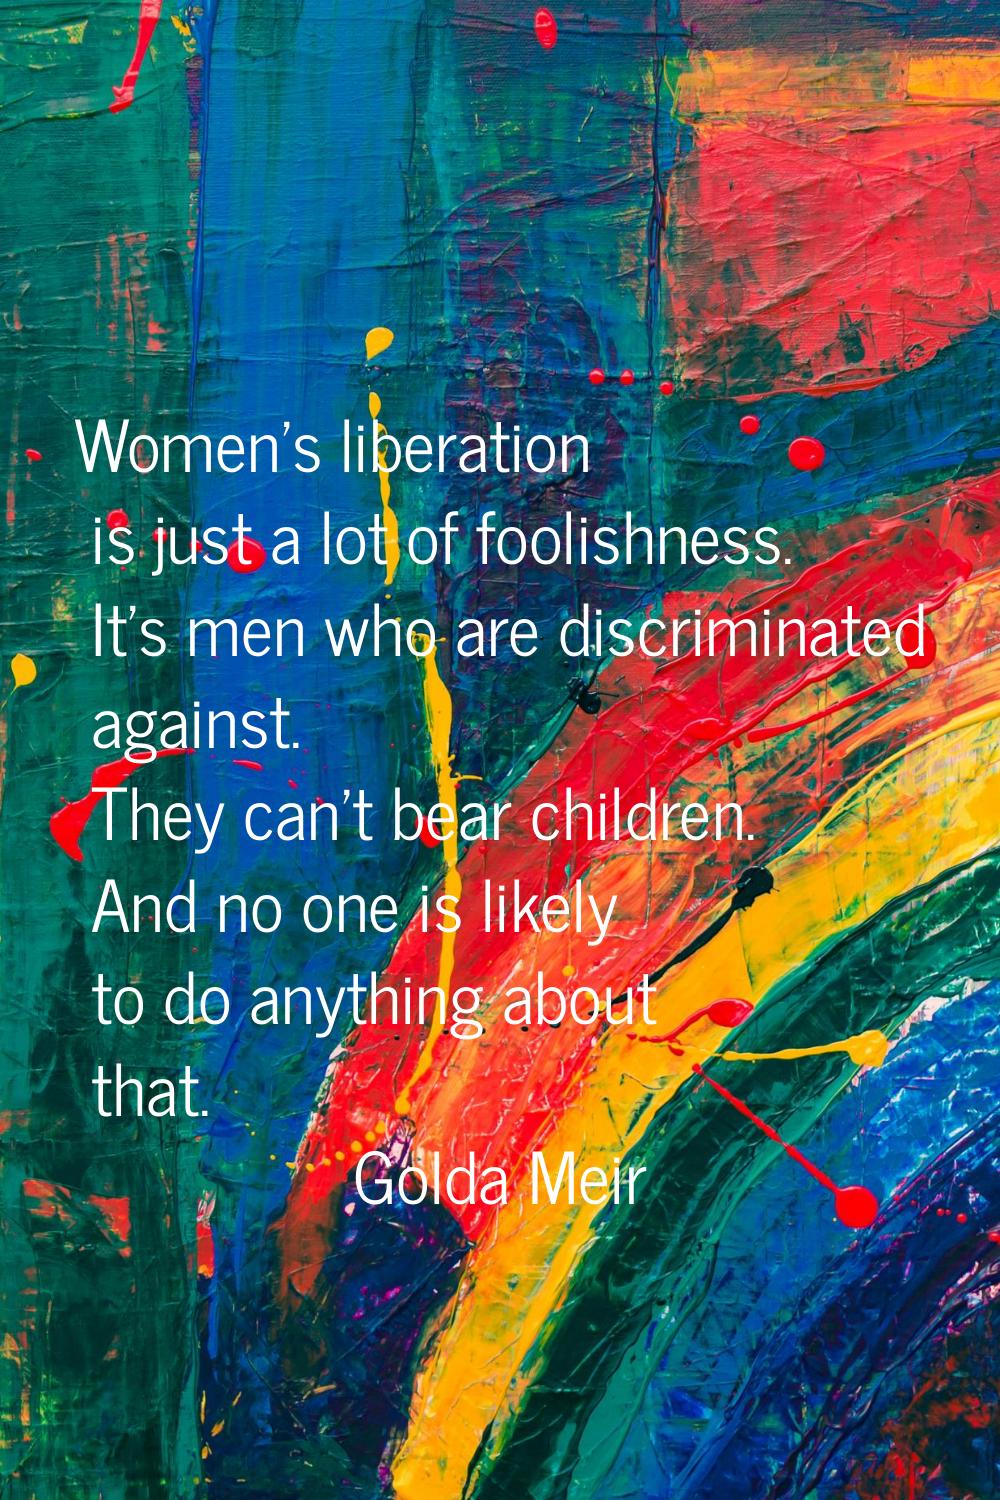 Women's liberation is just a lot of foolishness. It's men who are discriminated against. They can't